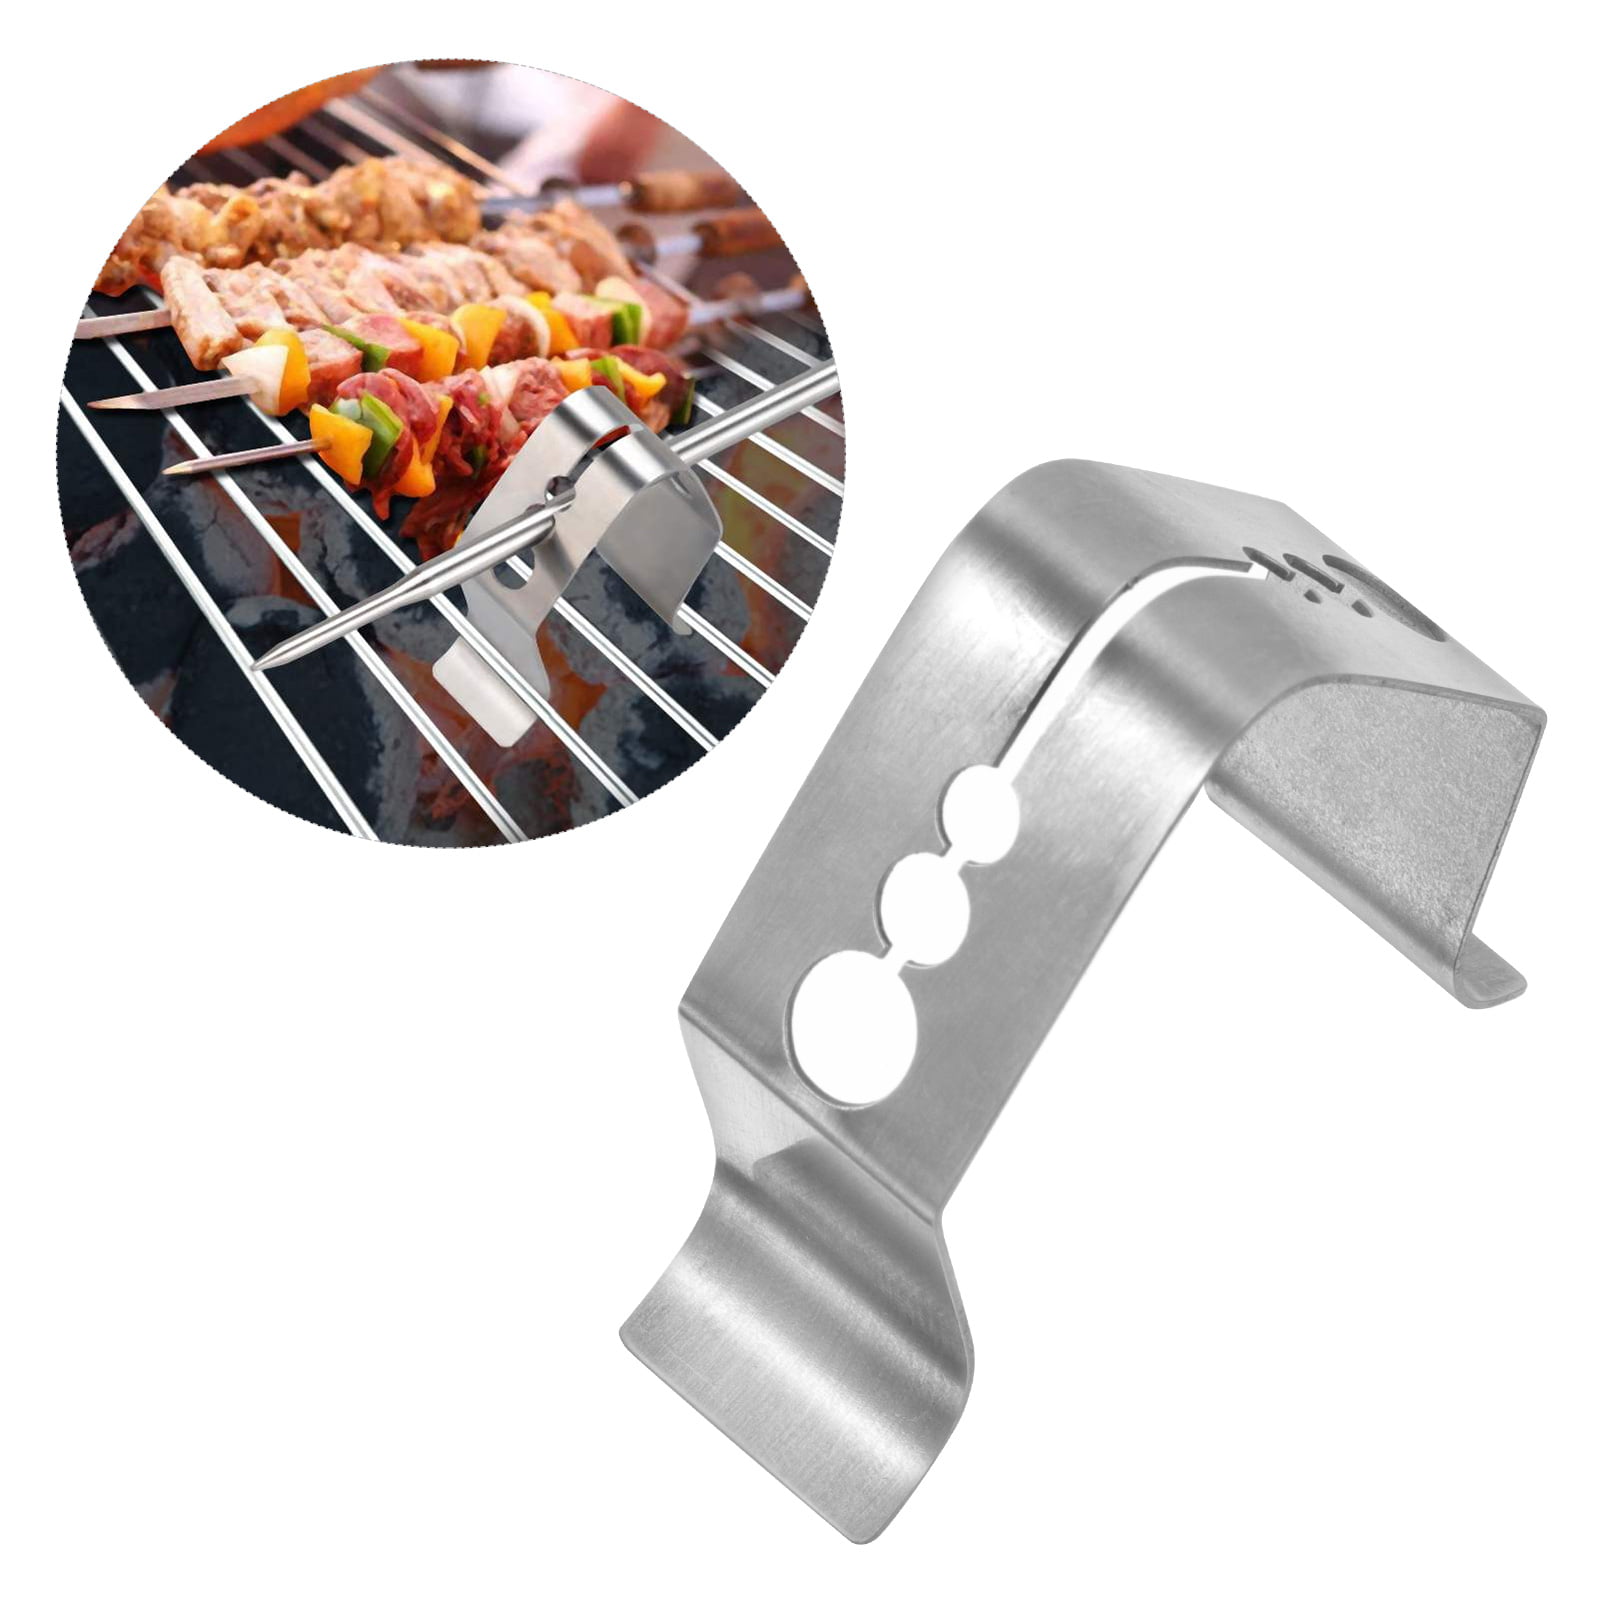 Stainless Steel BBQ Grill Thermometer With Probe 250°C Temperature Gauge  Sensor Barbecue Tools Kitchen Cooking Thermometer - AliExpress